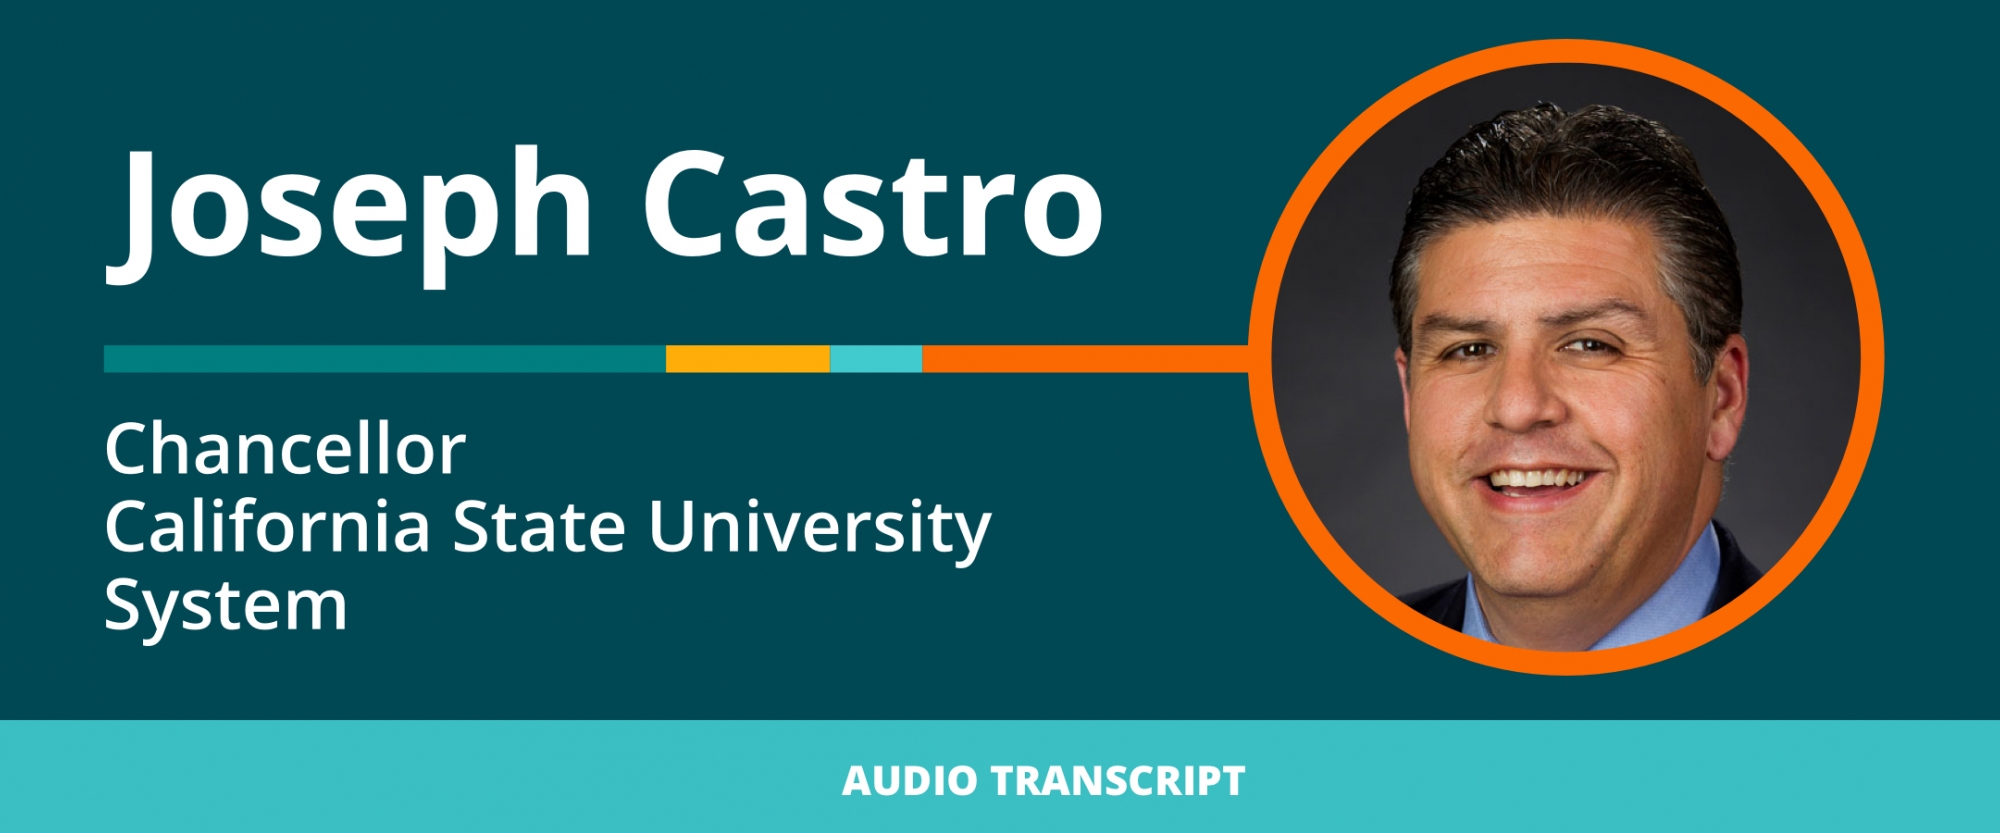 Weekly Wisdom 9/20/21: Transcript of Conversation With Joseph Castro, Chancellor, California State University System